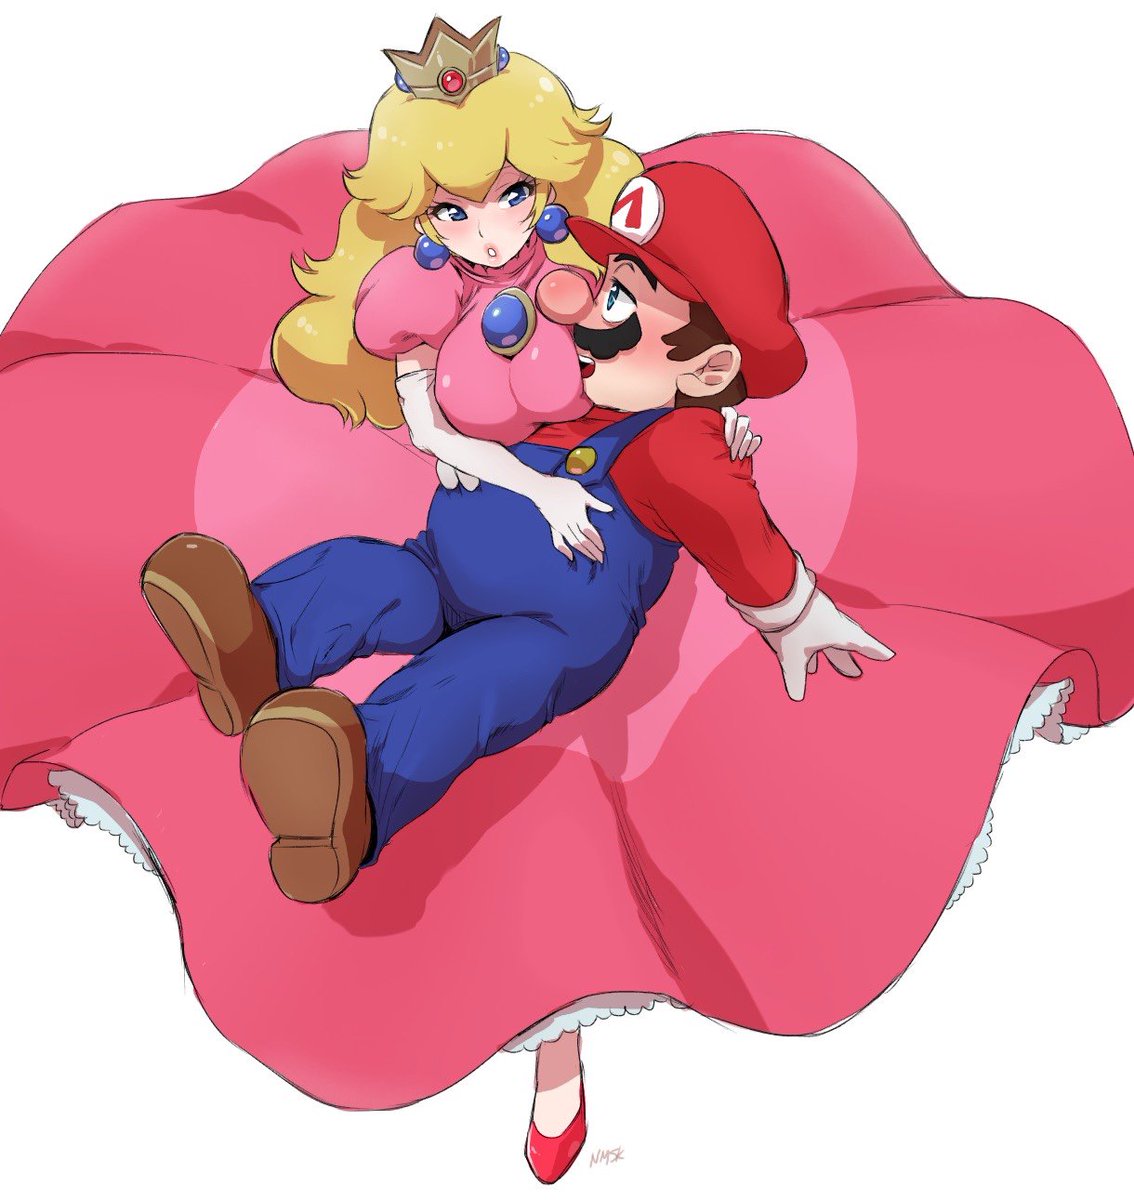 And I'll end with an extra (Side ) of Mario x Peach! 